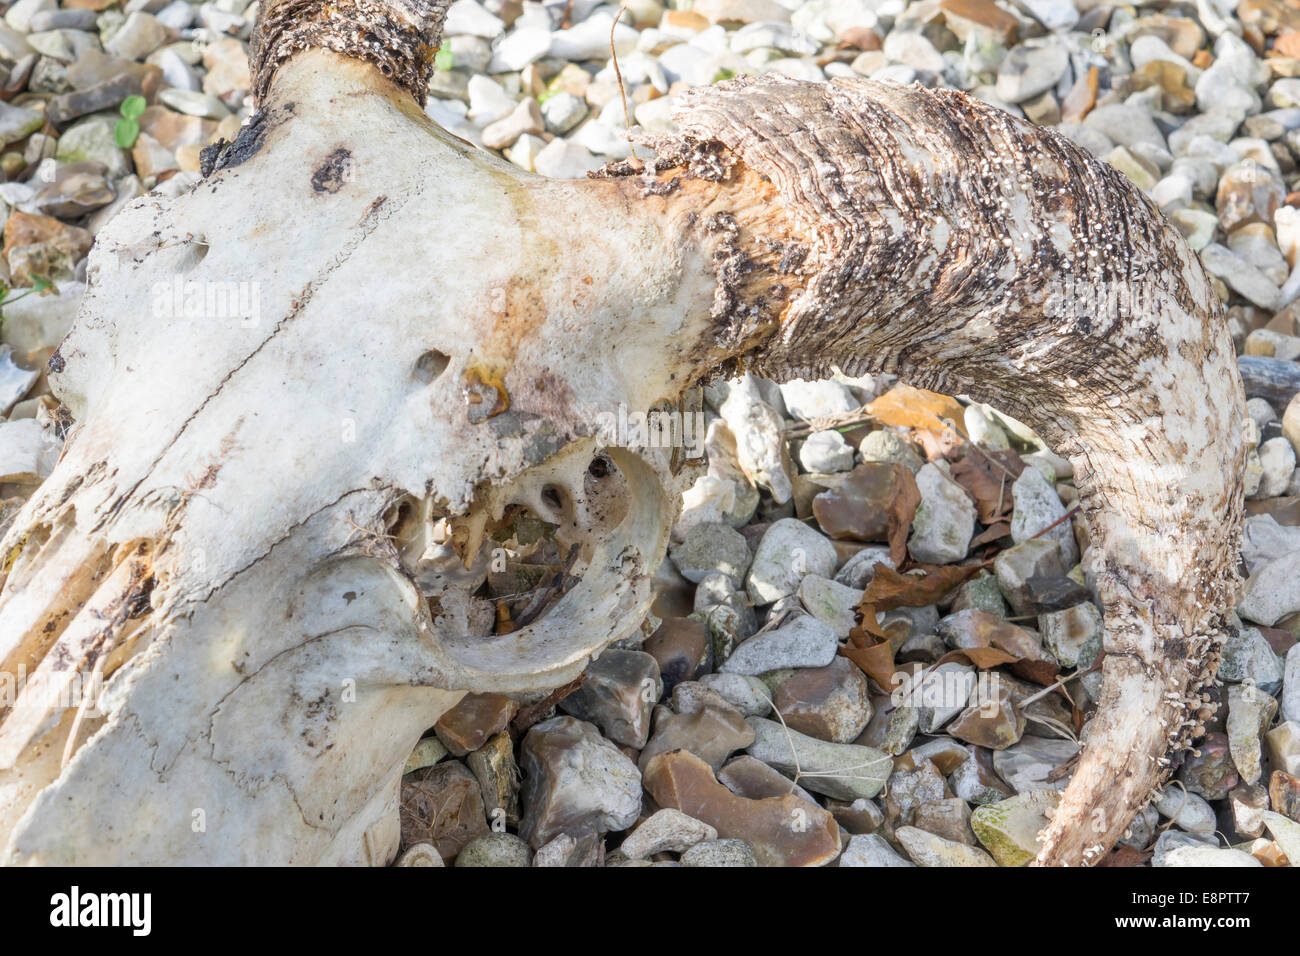 Decayed skull of a domestic sheep (Ovis aries) with strong curved horns lying on gravel Stock Photo